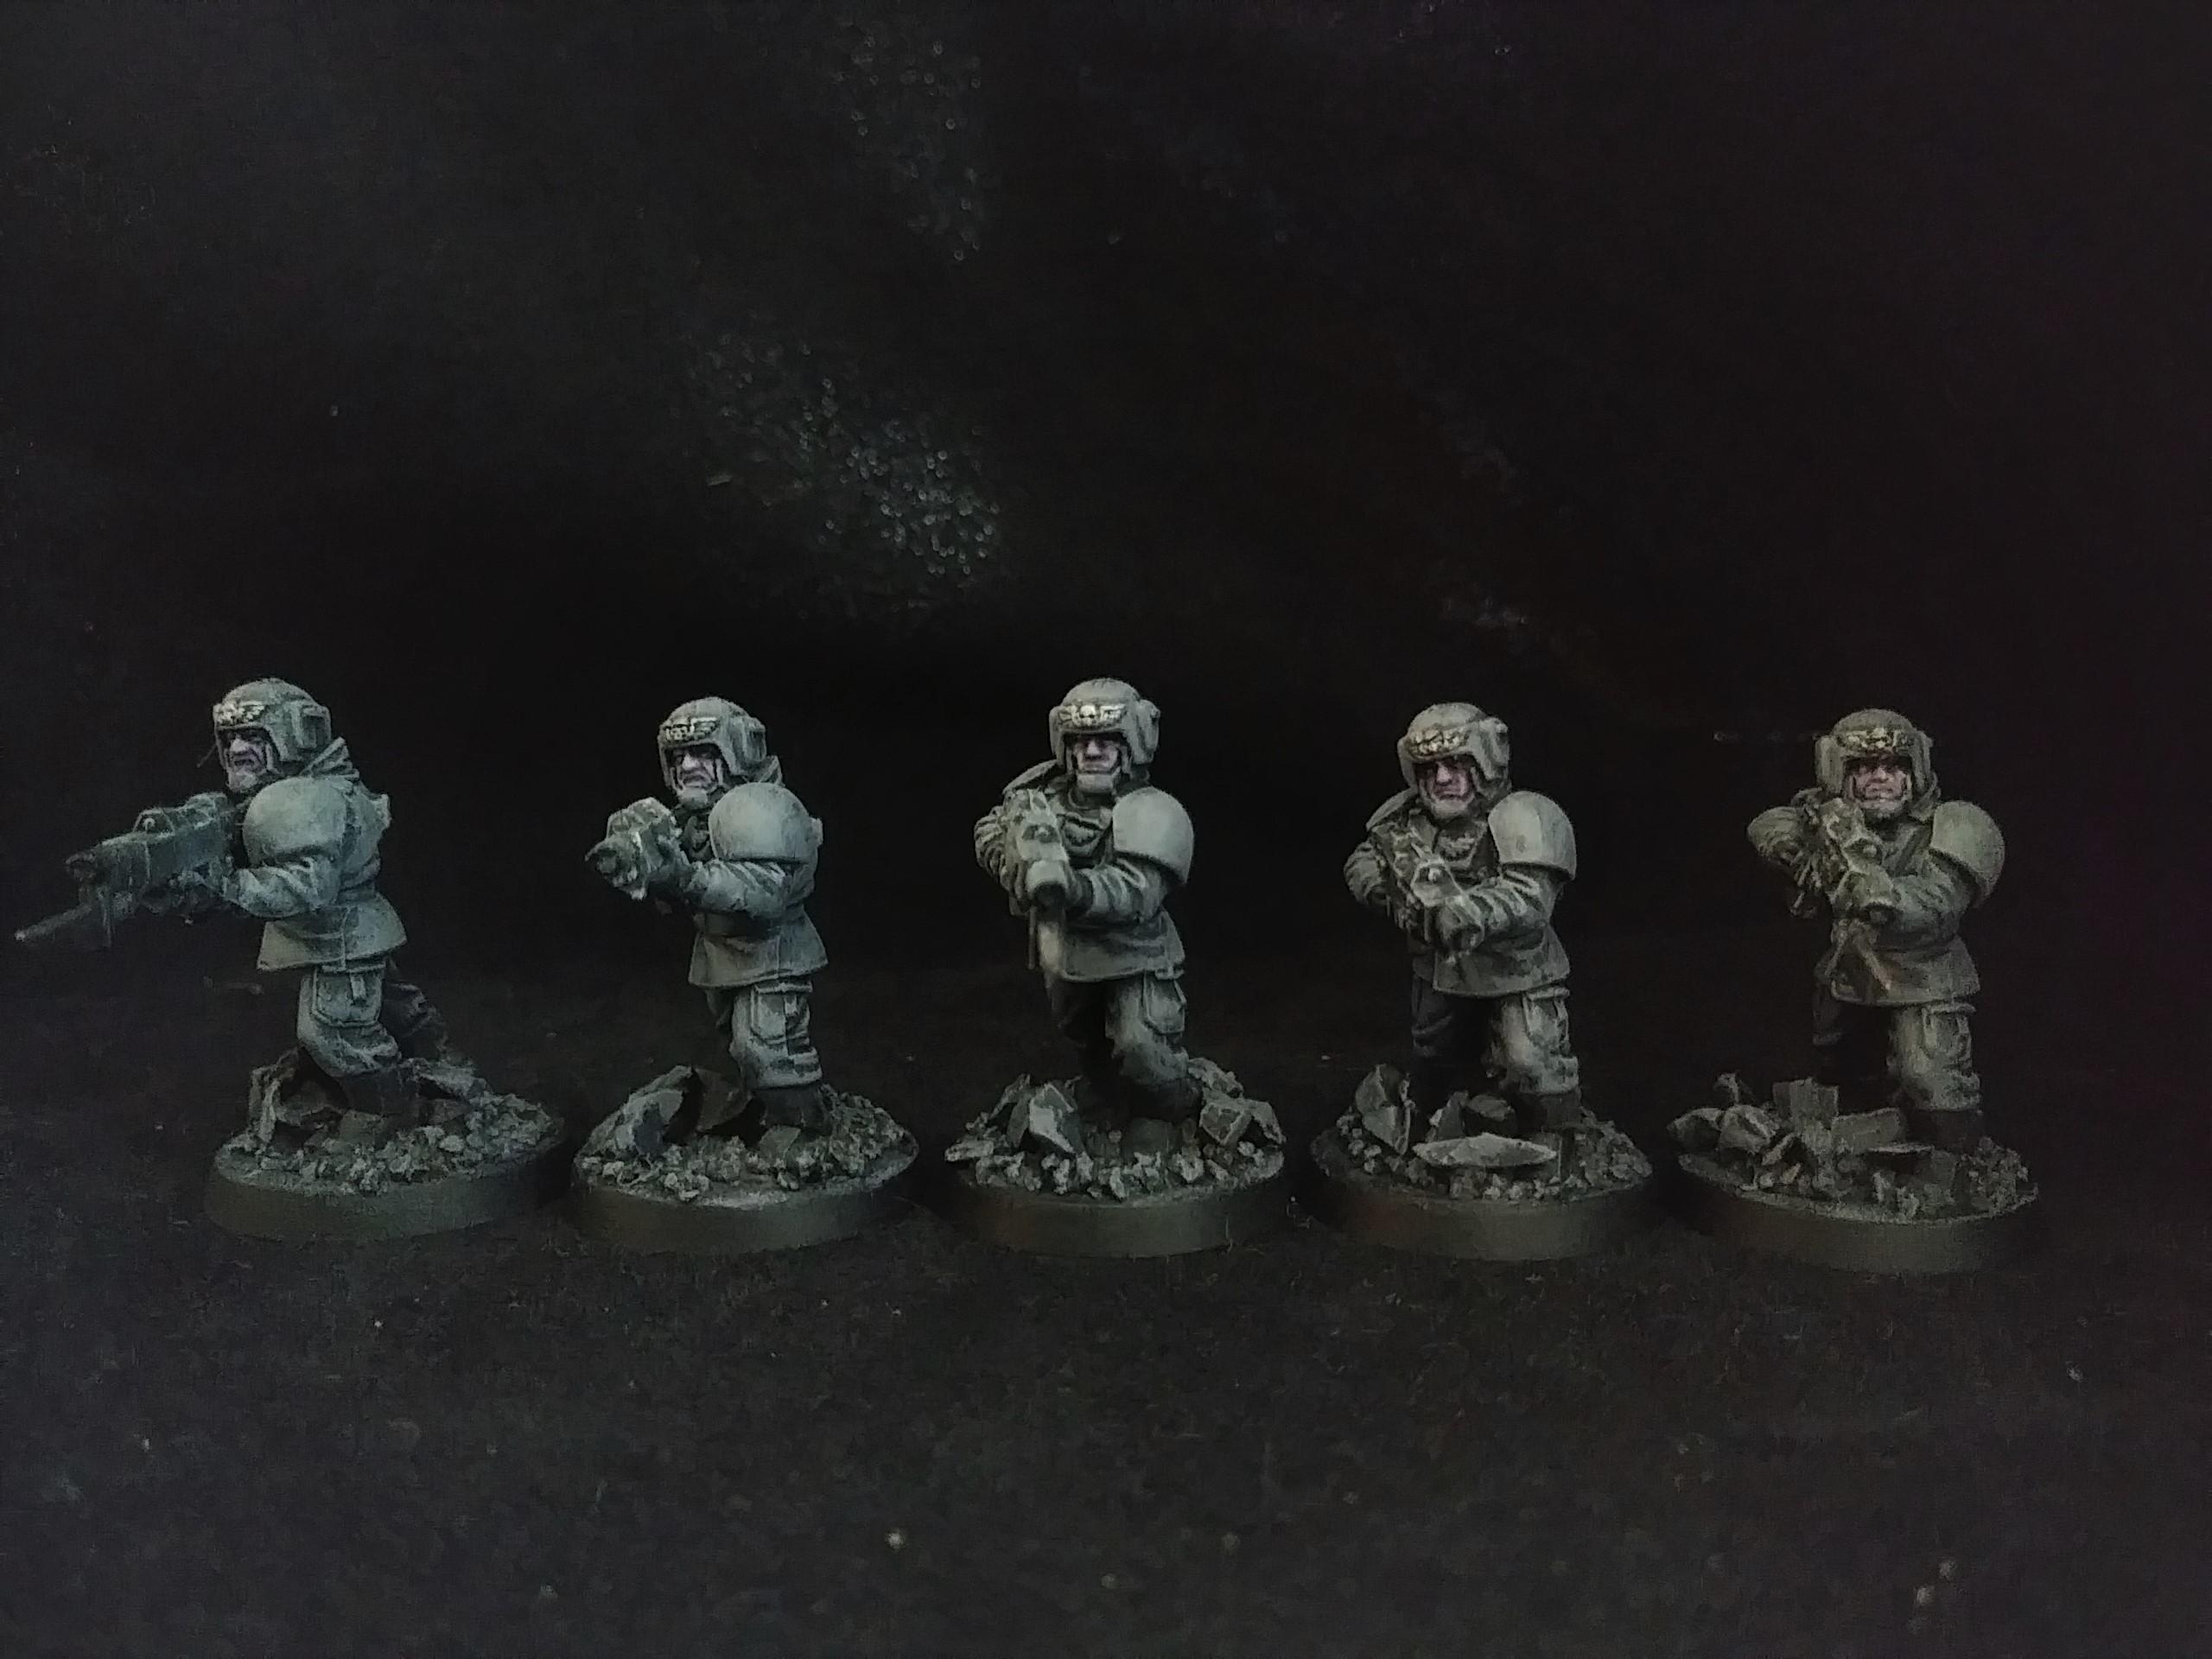 Astra Militarum, Cadian Shock Troops, Cadians, Eastern Front, Guard, Heretics, Imperial, Imperial Guard, Kronstadt, Militia, Planetary Defence Force, Red Army, Renegades, Renegades And Heretics